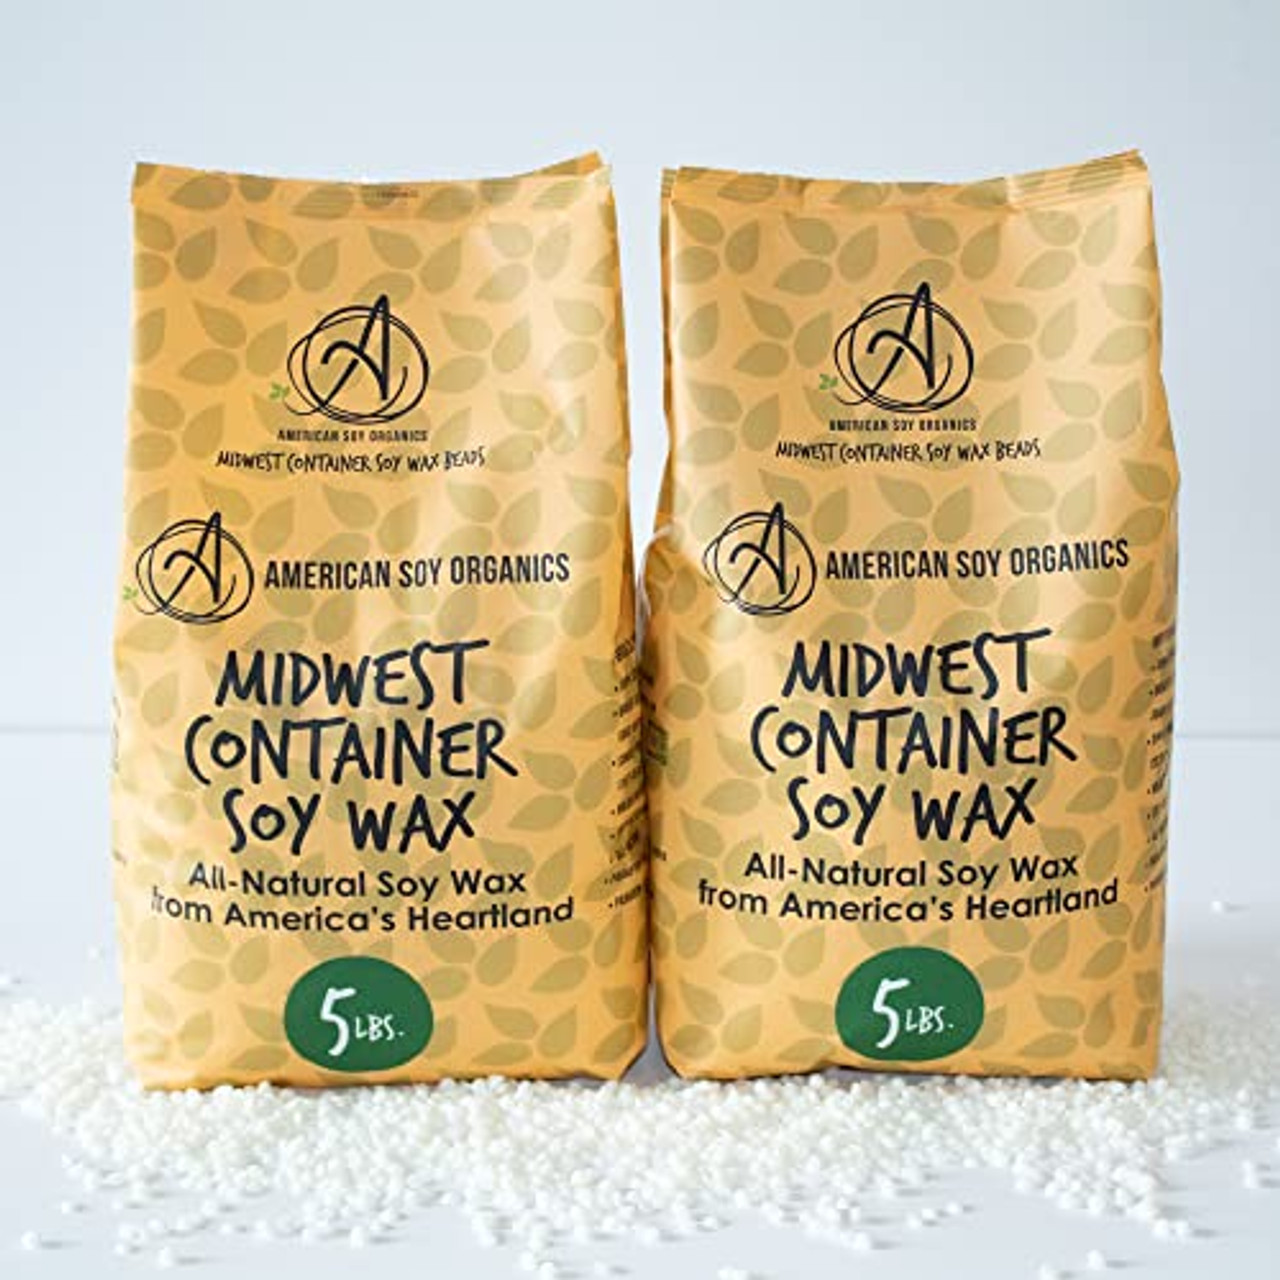 American Soy Organics - 100% Midwest Soy Container Wax Beads for Candle Making 10 lb Bag